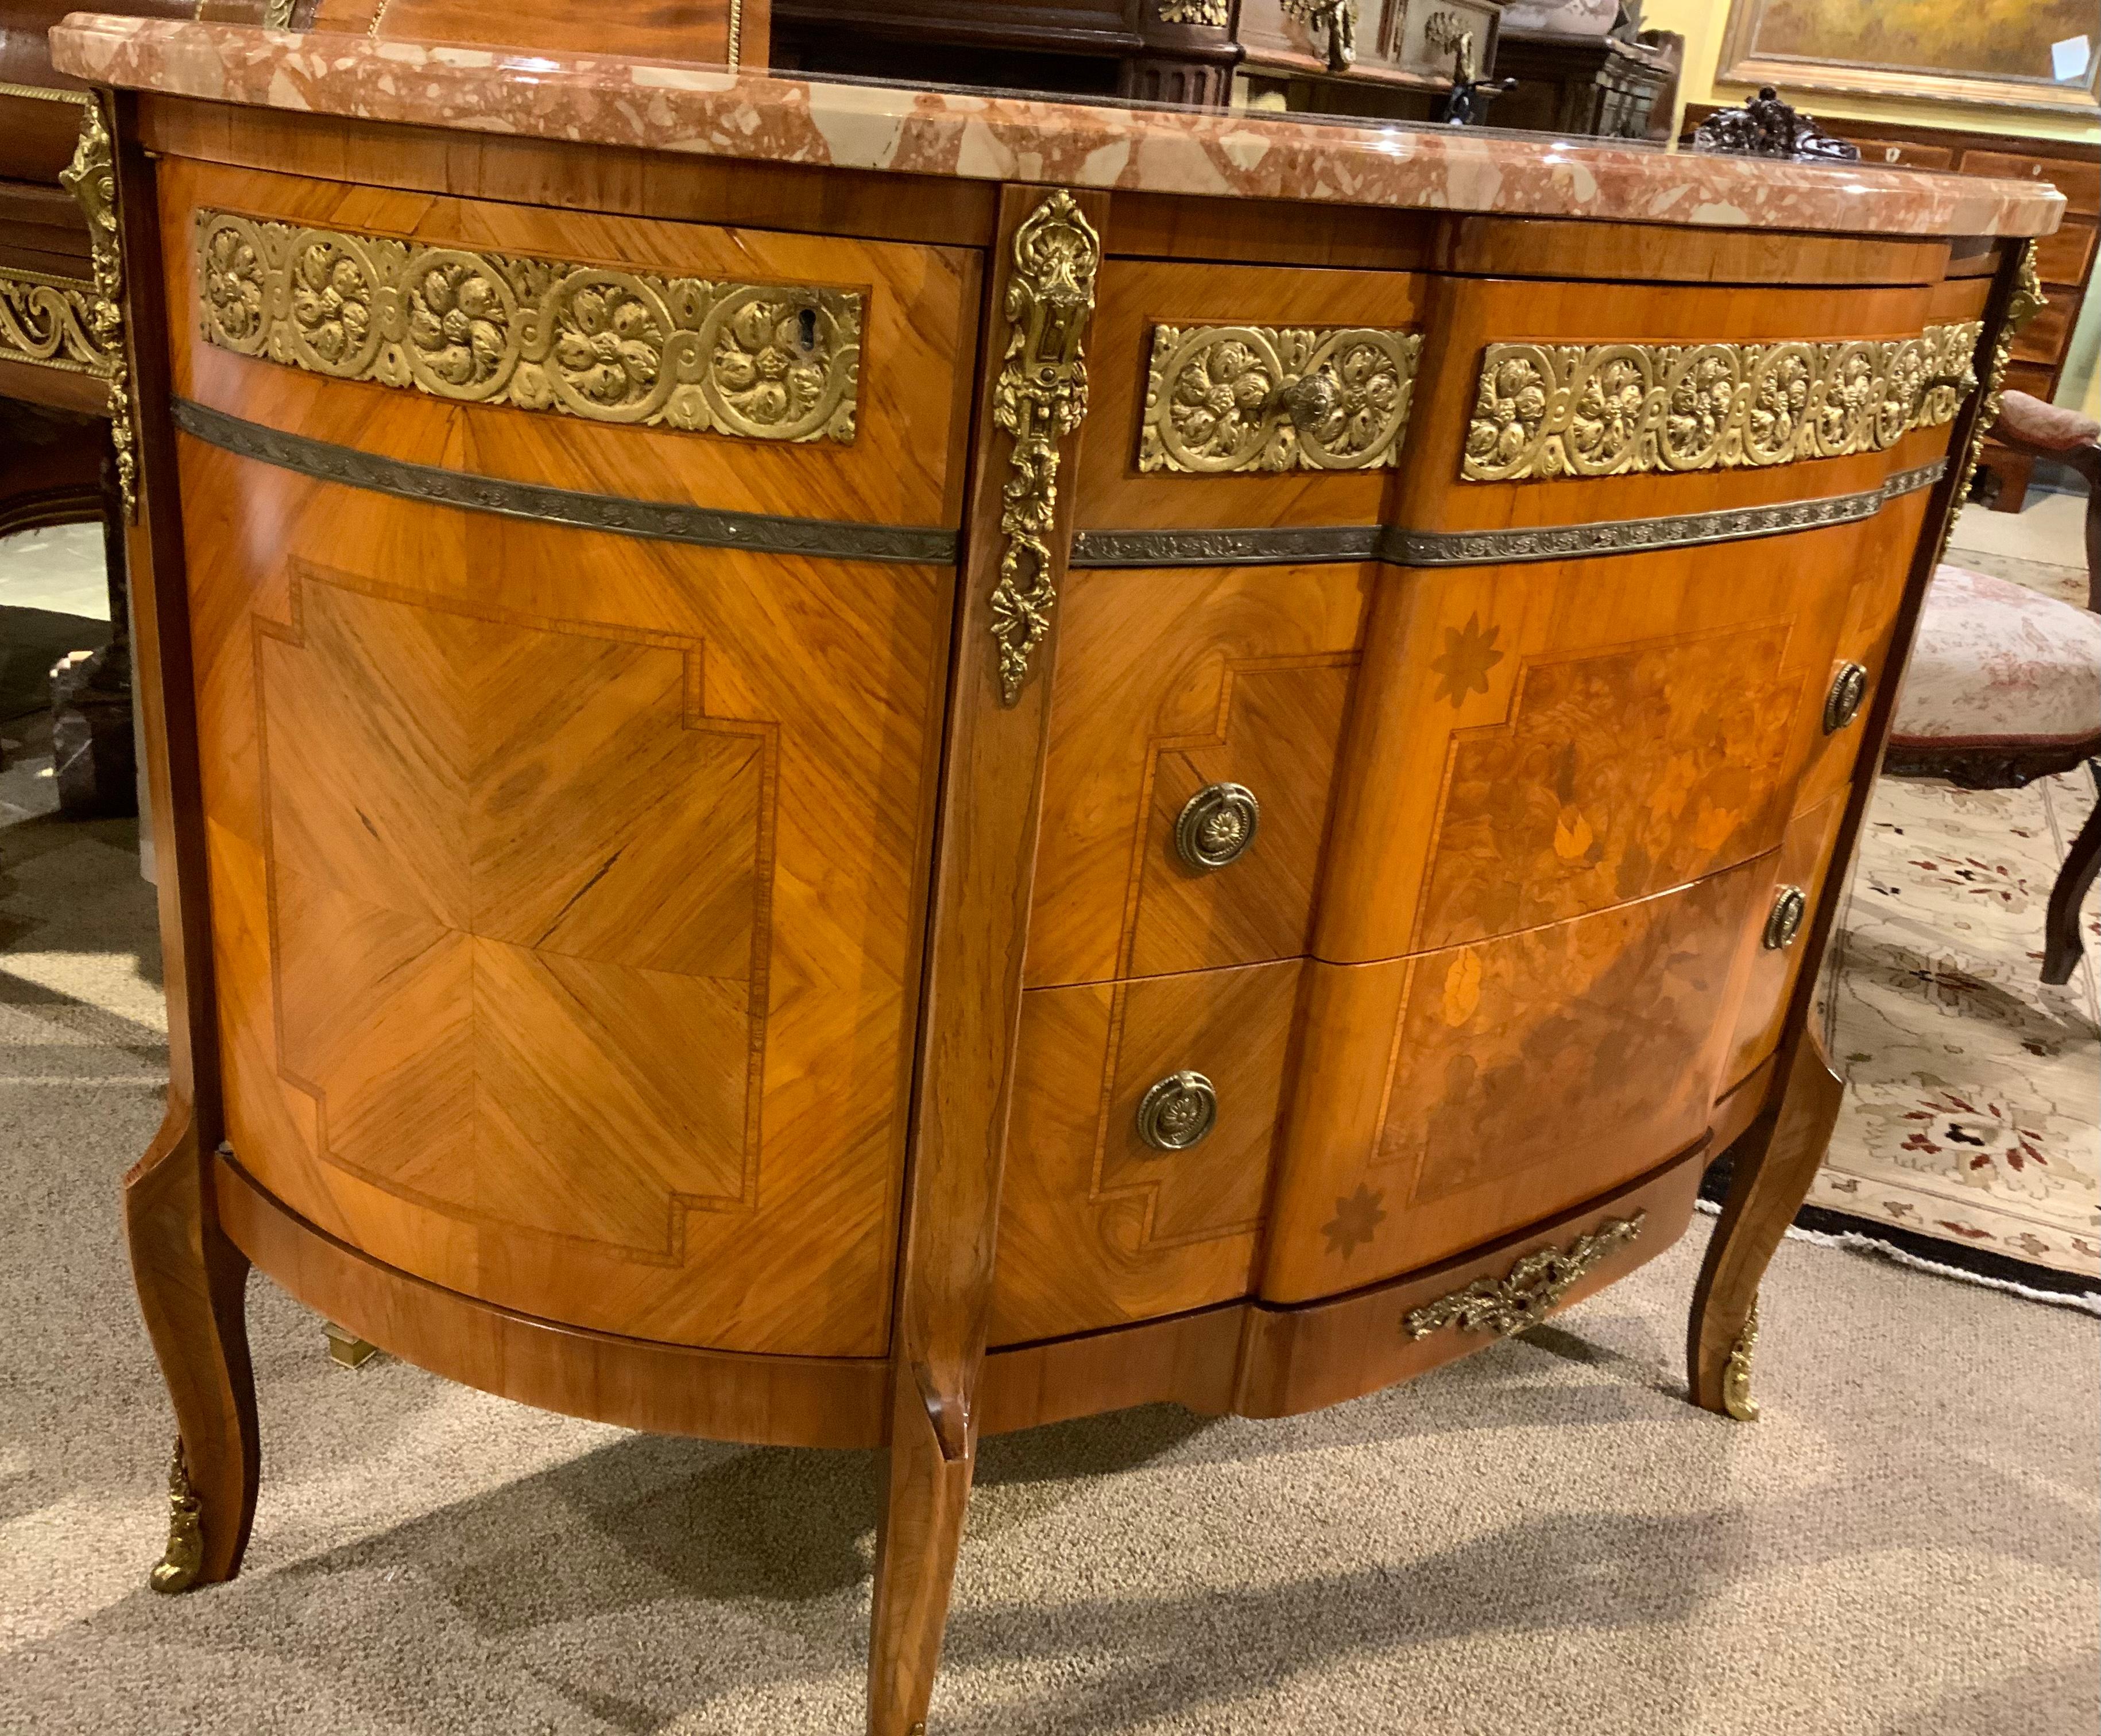 This commode has a bowed shape above a conforming case
Fitted with an ormolu-inset frieze drawer over two long, deep drawers
With a central paneled floral inlay, raised on cabriole legs ending
In sabots. The graceful curved shape of this piece